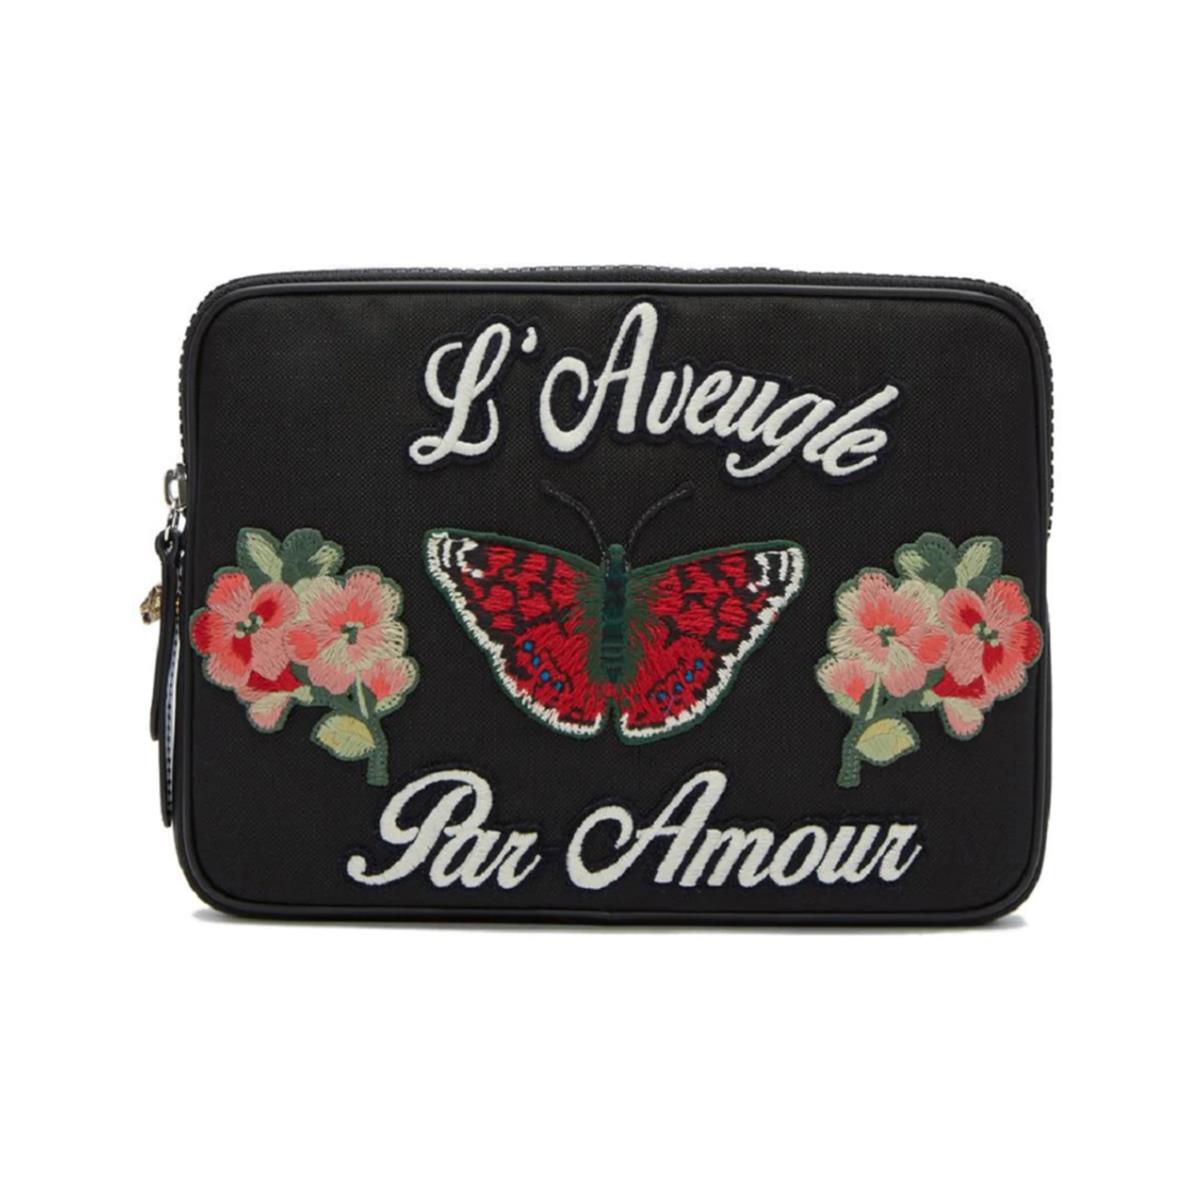 Gucci Black Techno Canvas Embroidered Butterfly Ipad Case Clutch 473883 1058